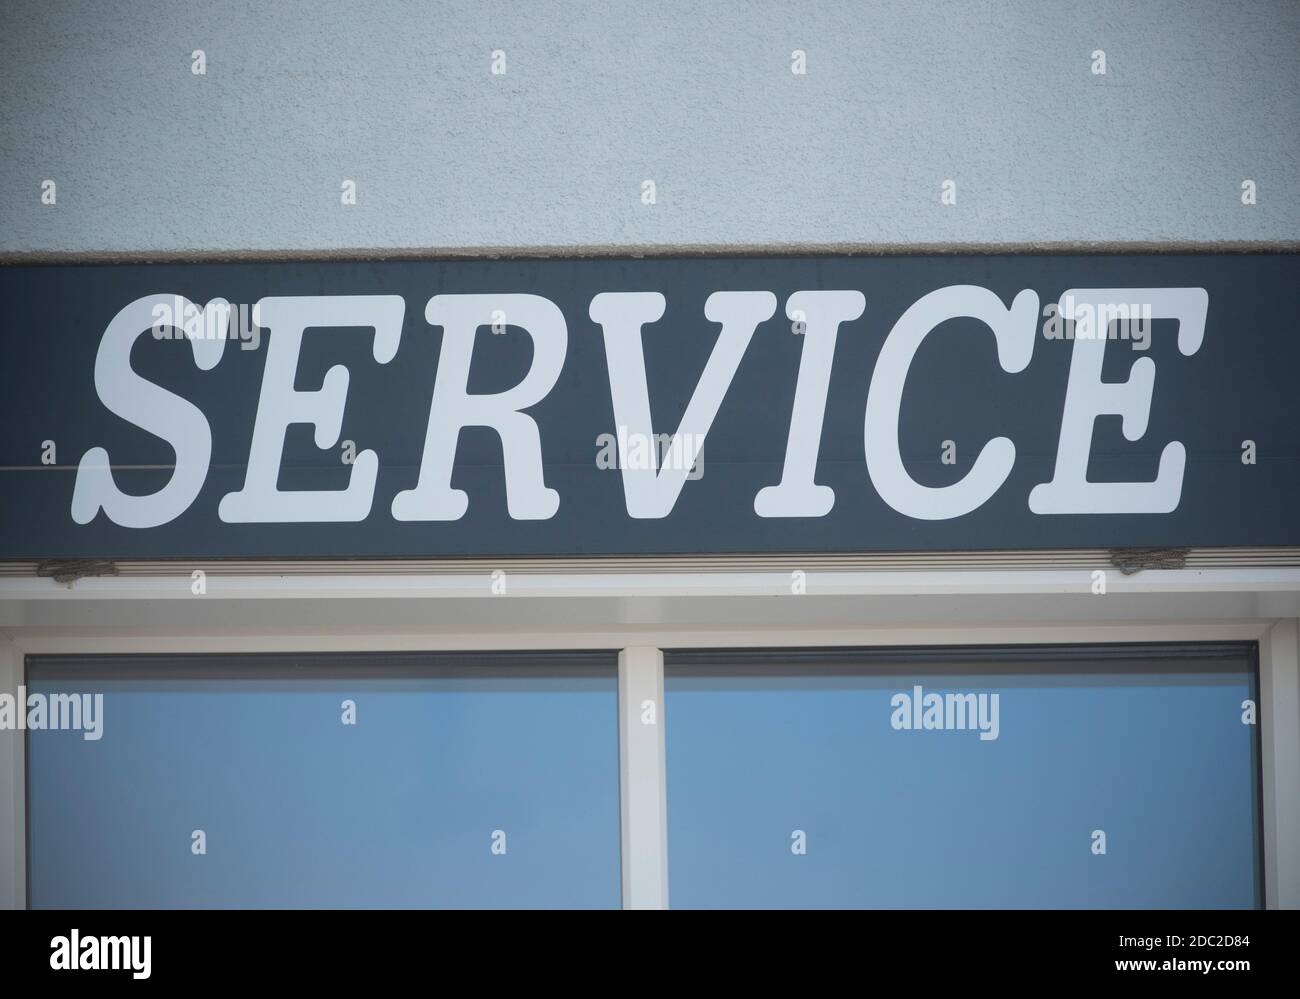 service sign on a wall, public service office in administration Stock Photo